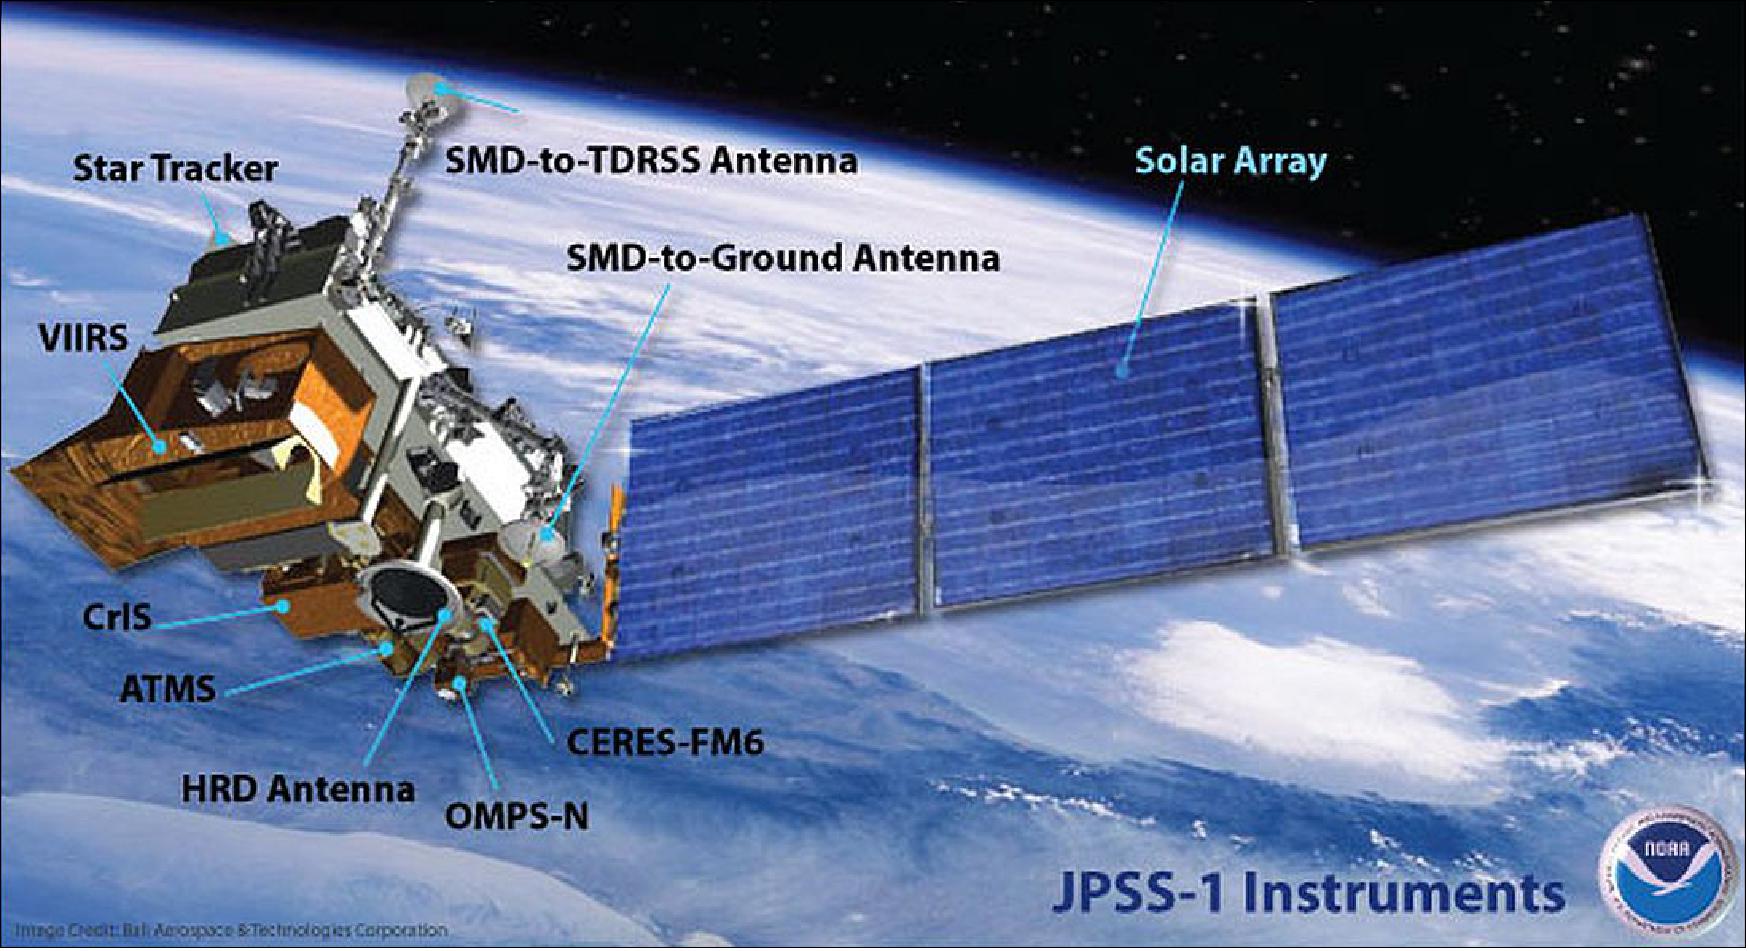 Figure 18: JPSS-1 satellite, including instruments and other key components (image credit: NOAA, BATC)